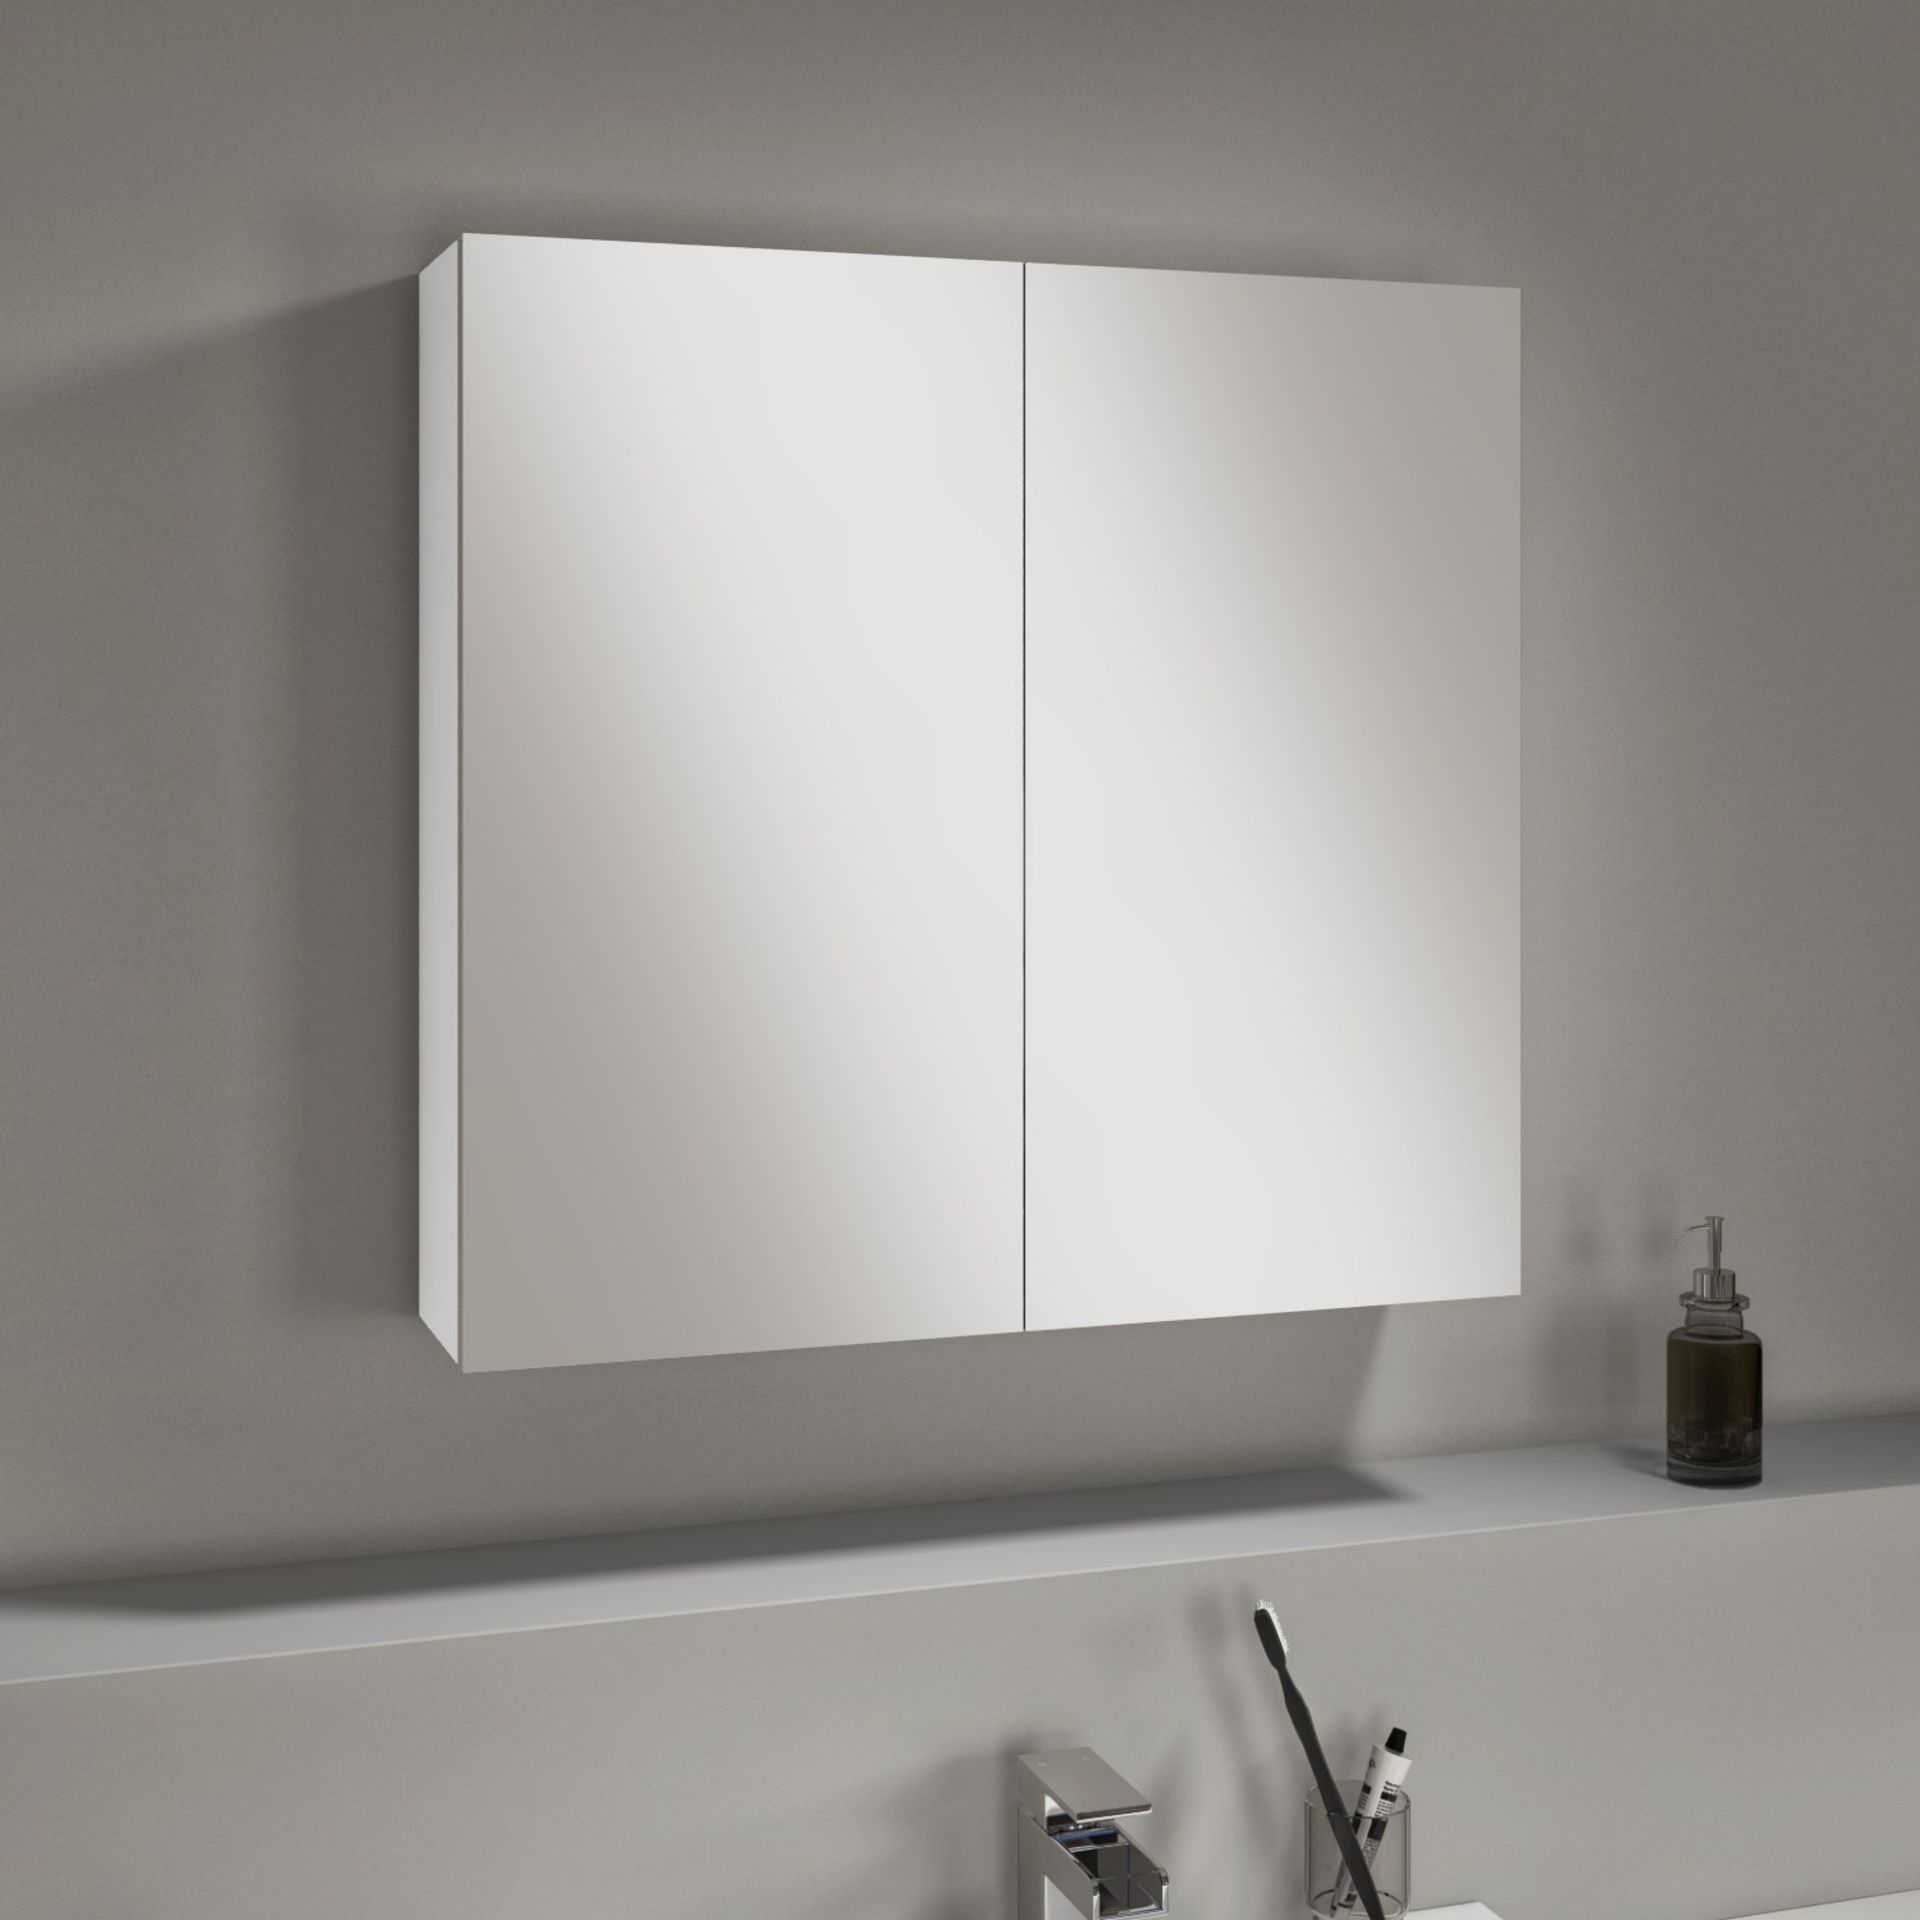 New (N52) White Gloss Mirrored Double Door Bathroom Wall Cabinet 500mm, Contemporary design wit...